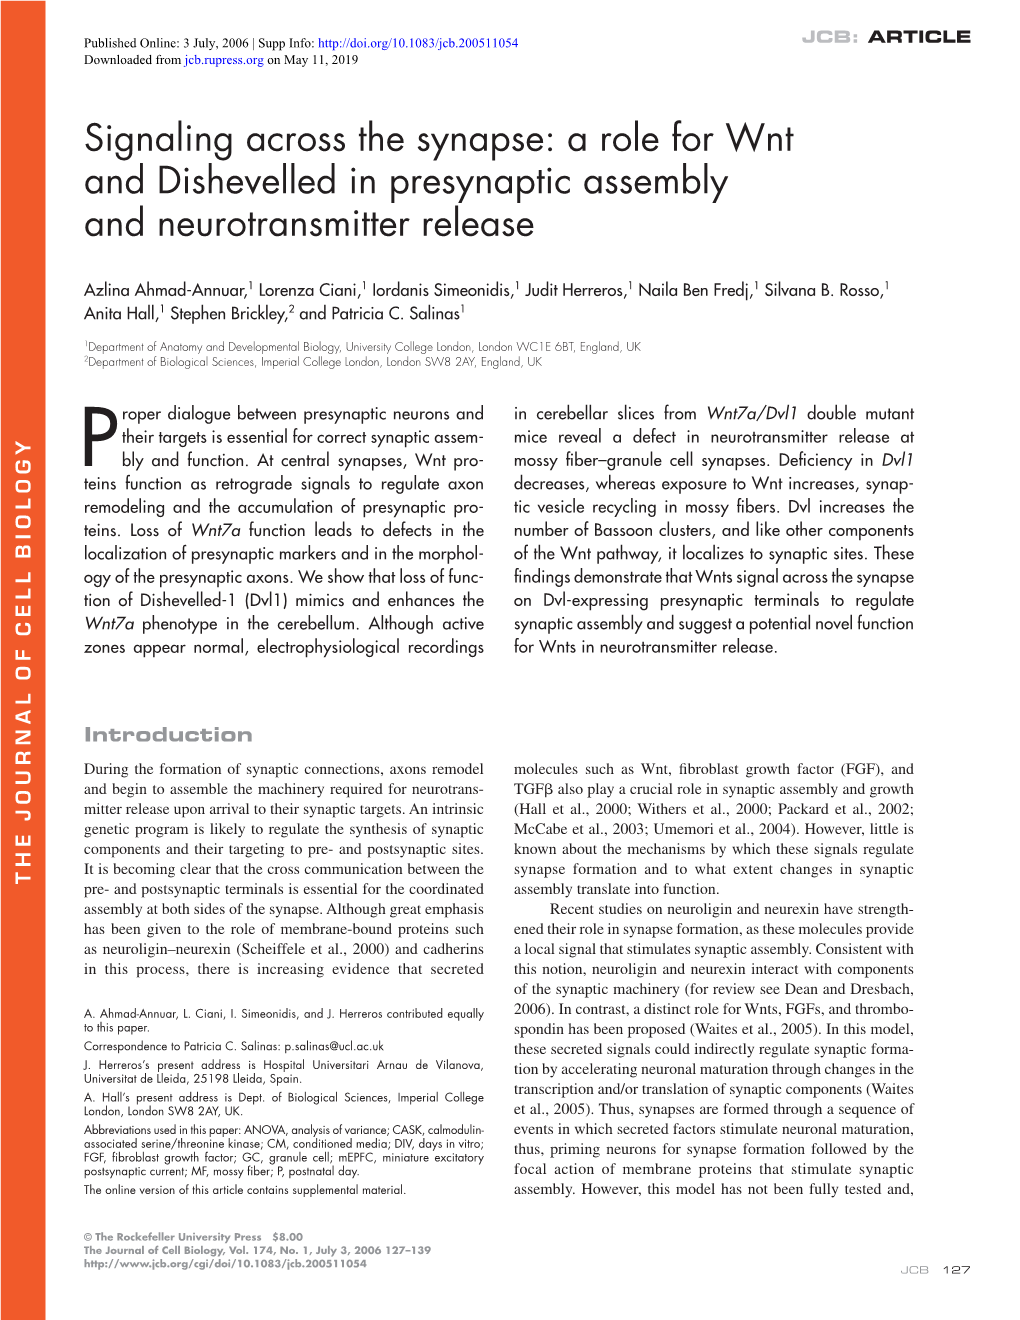 A Role for Wnt and Dishevelled in Presynaptic Assembly And